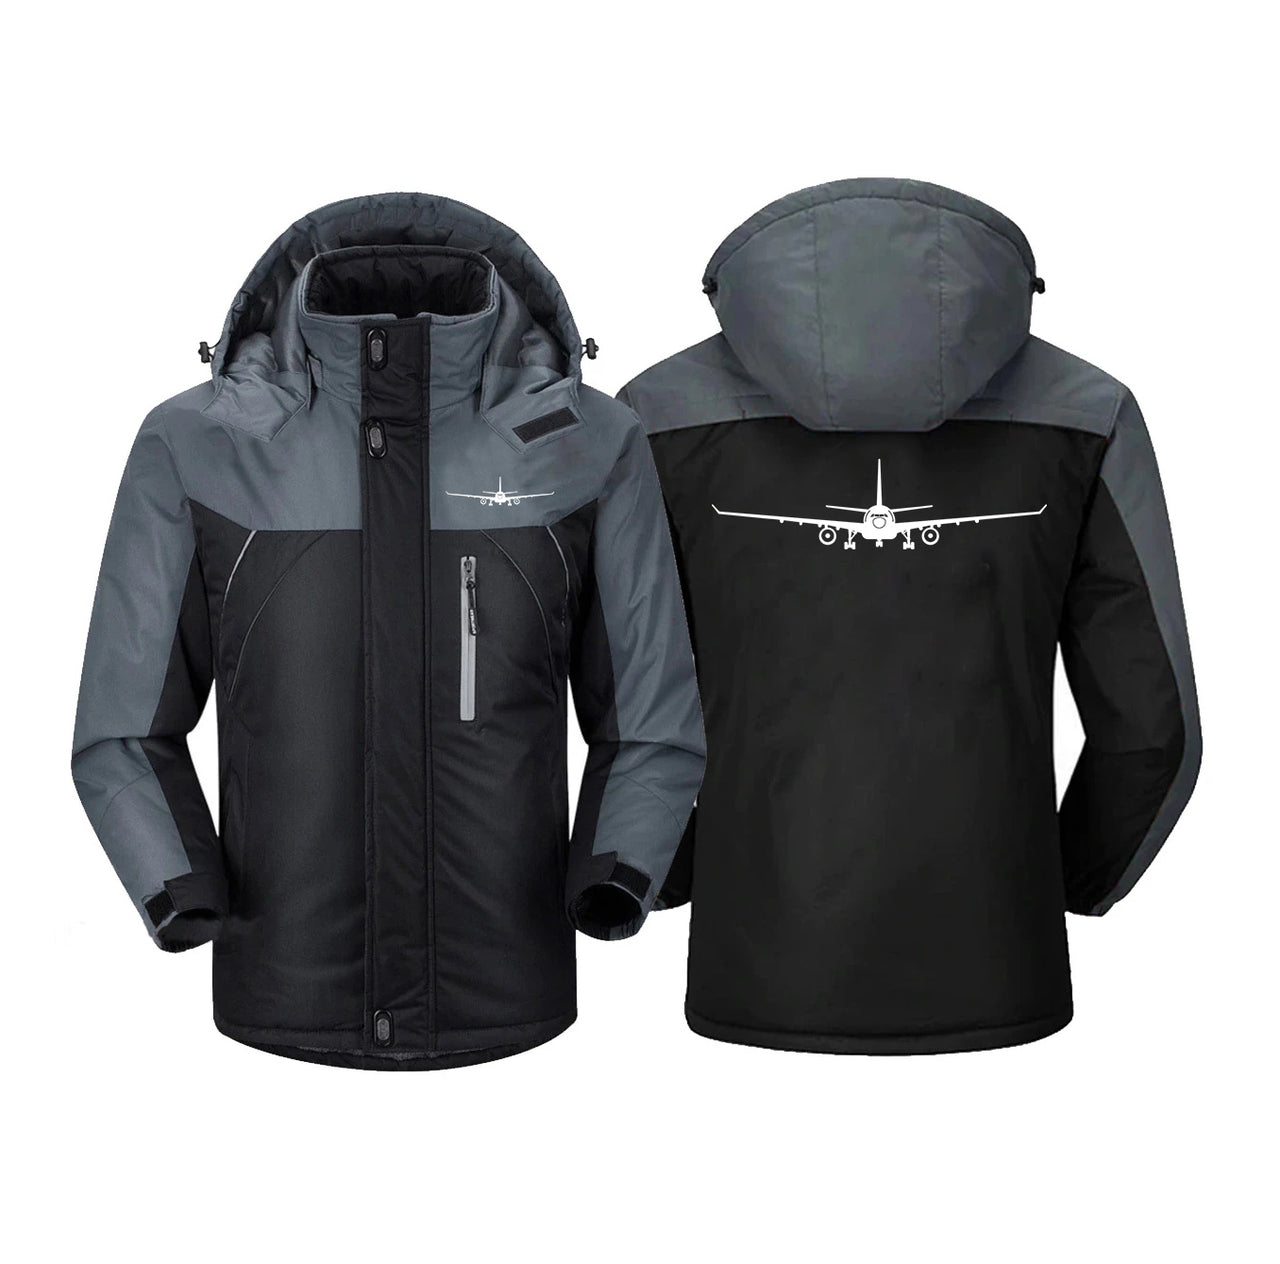 Airbus A330 Silhouette Designed Thick Winter Jackets